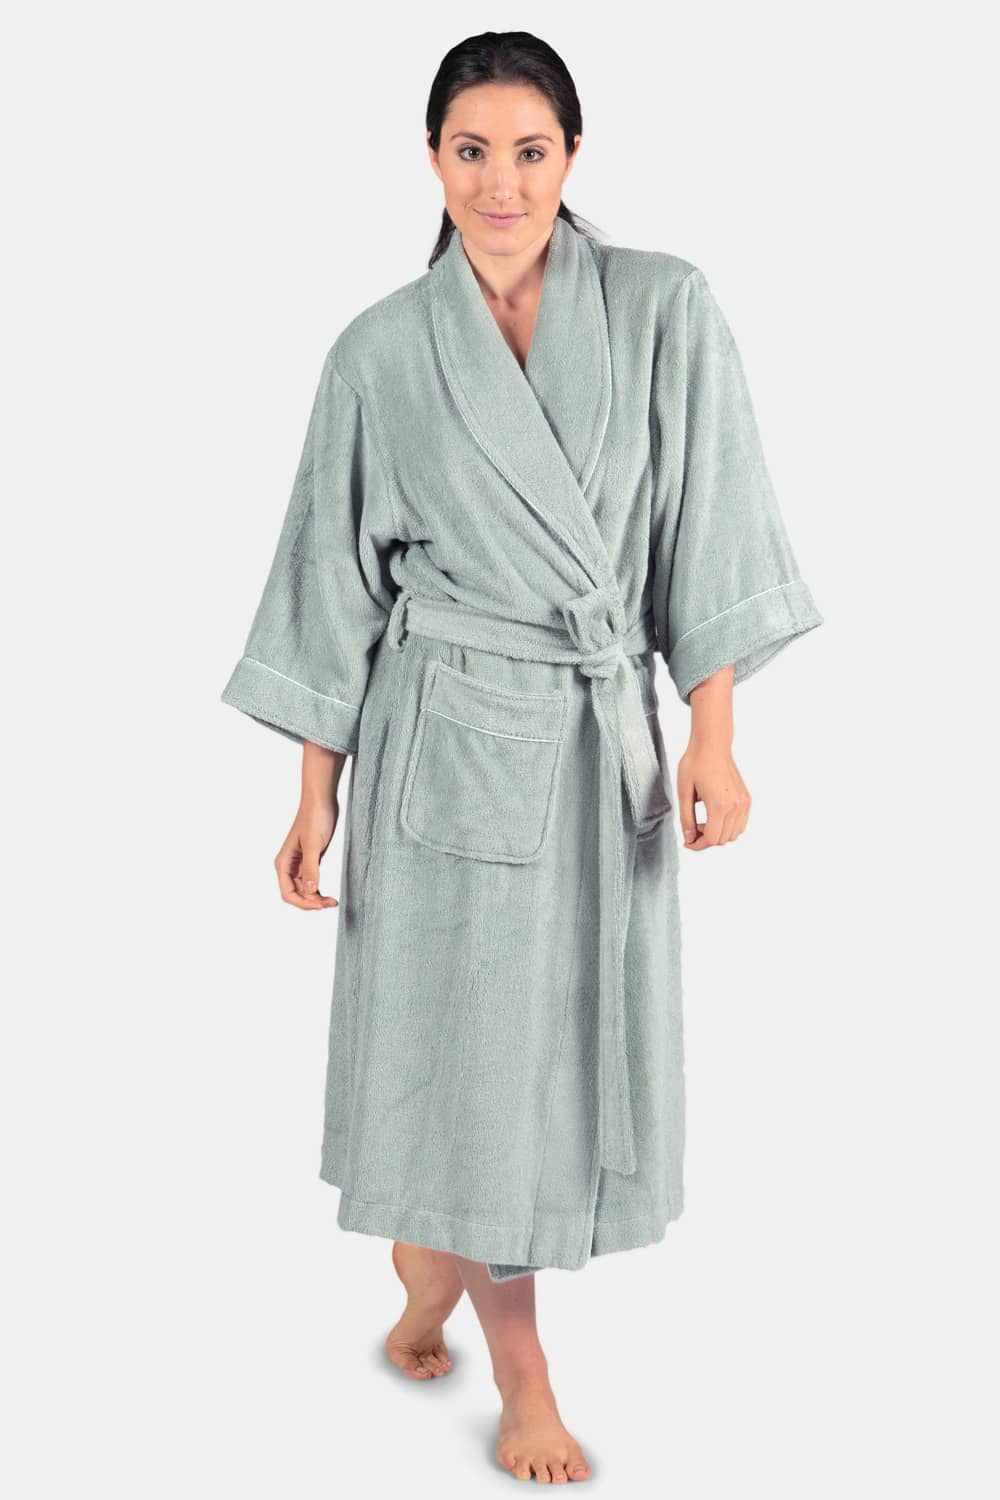 Texere Women's Terry Cloth Bathrobe Womens>Spa>Robe Fishers Finery Lily Green S/M 